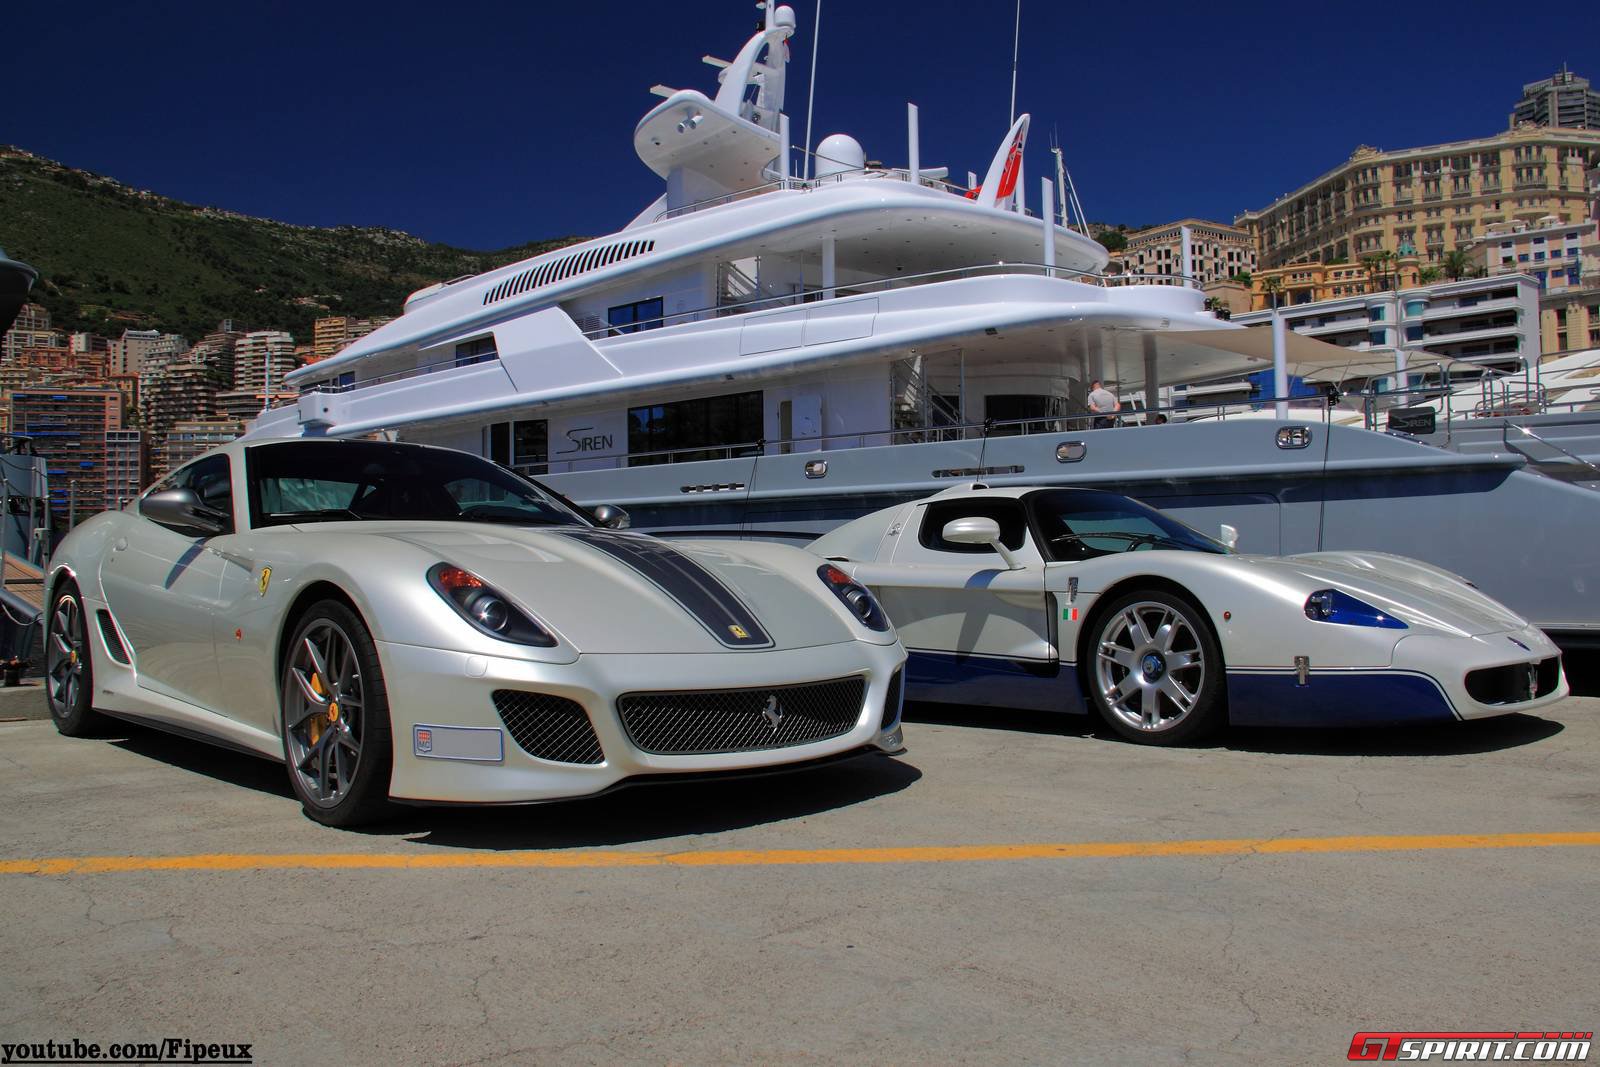 Video: Why Monaco is the Ideal Place for Supercar Spotting - GTspirit